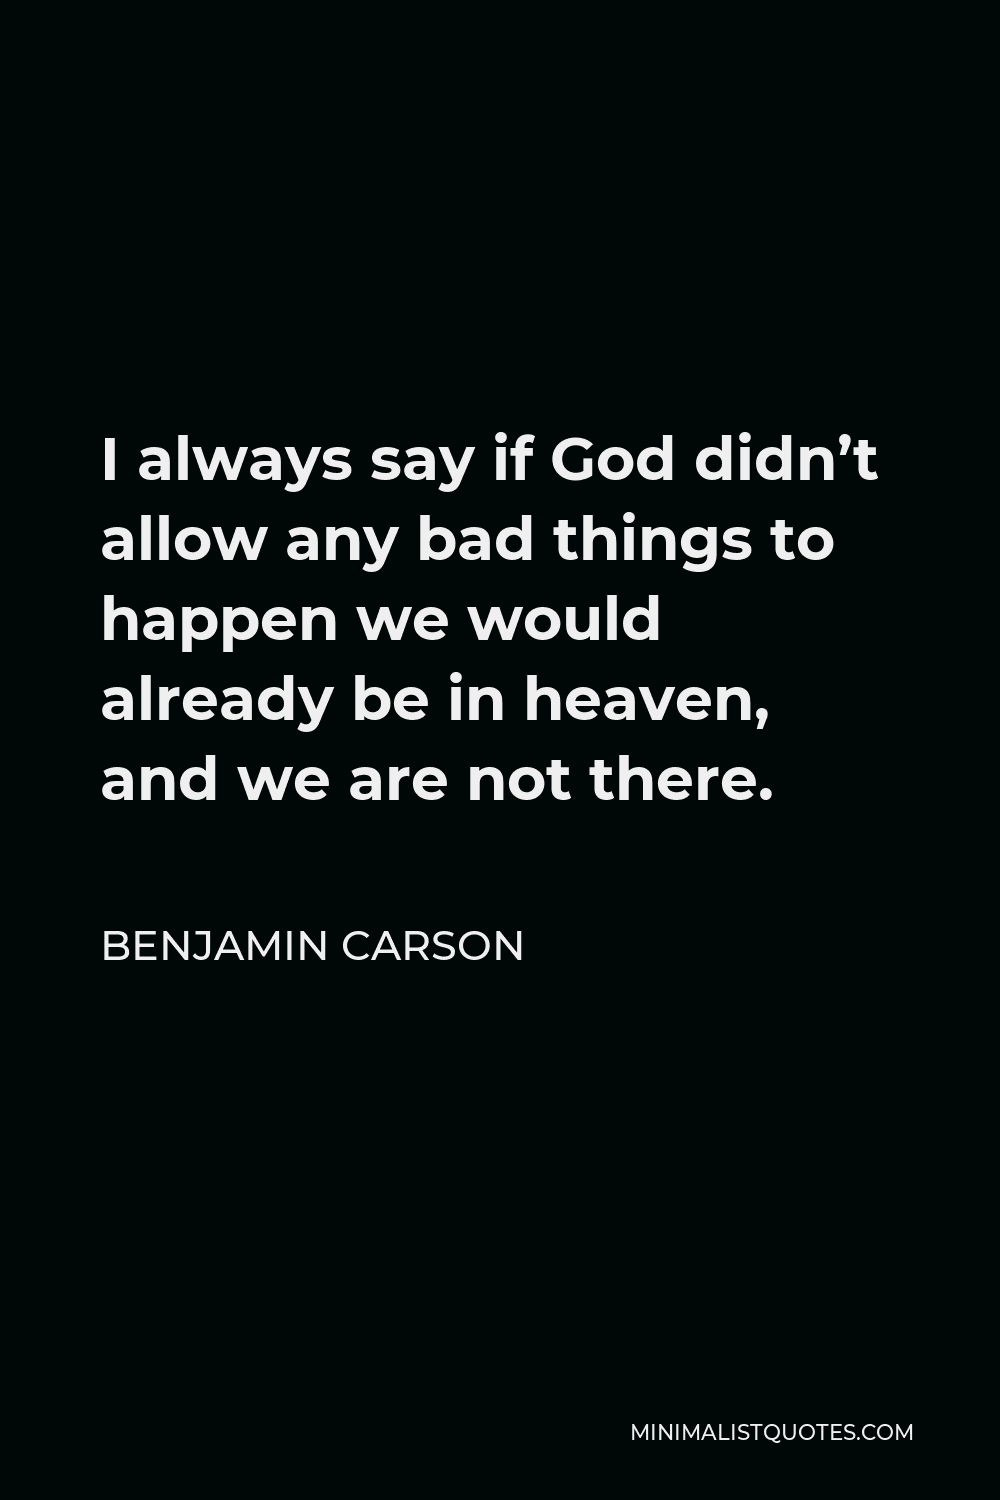 Benjamin Carson Quote - I always say if God didn’t allow any bad things to happen we would already be in heaven, and we are not there.